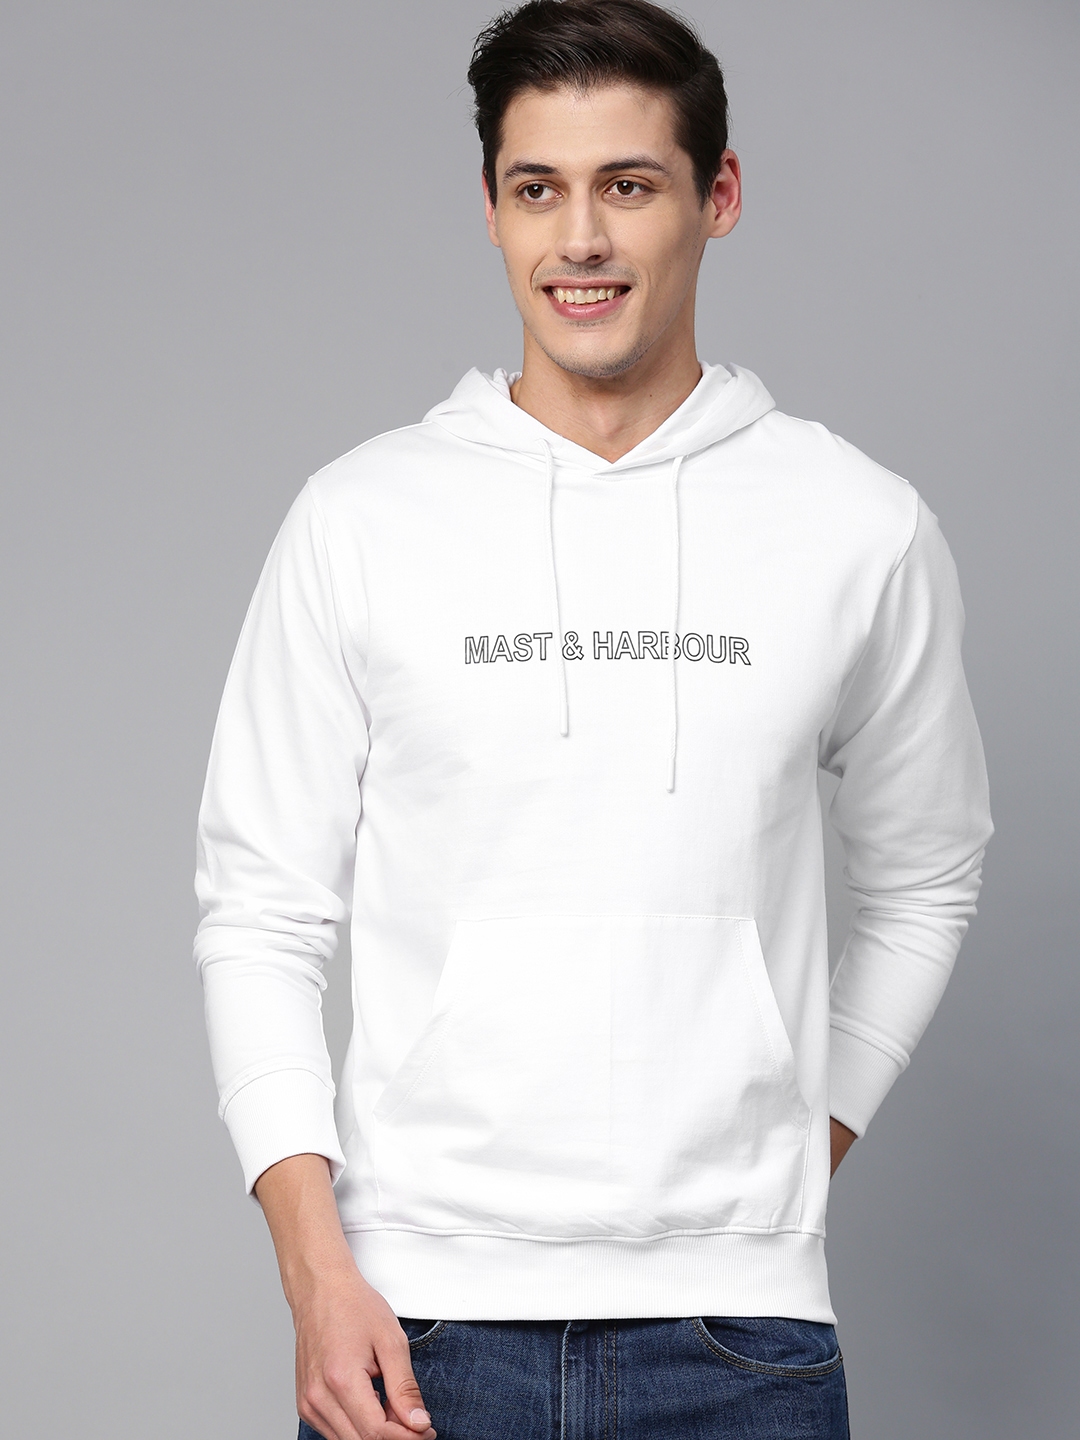 Full Sleeves H&M Unisex Hoodies For Men/Women at Rs 1199/piece in